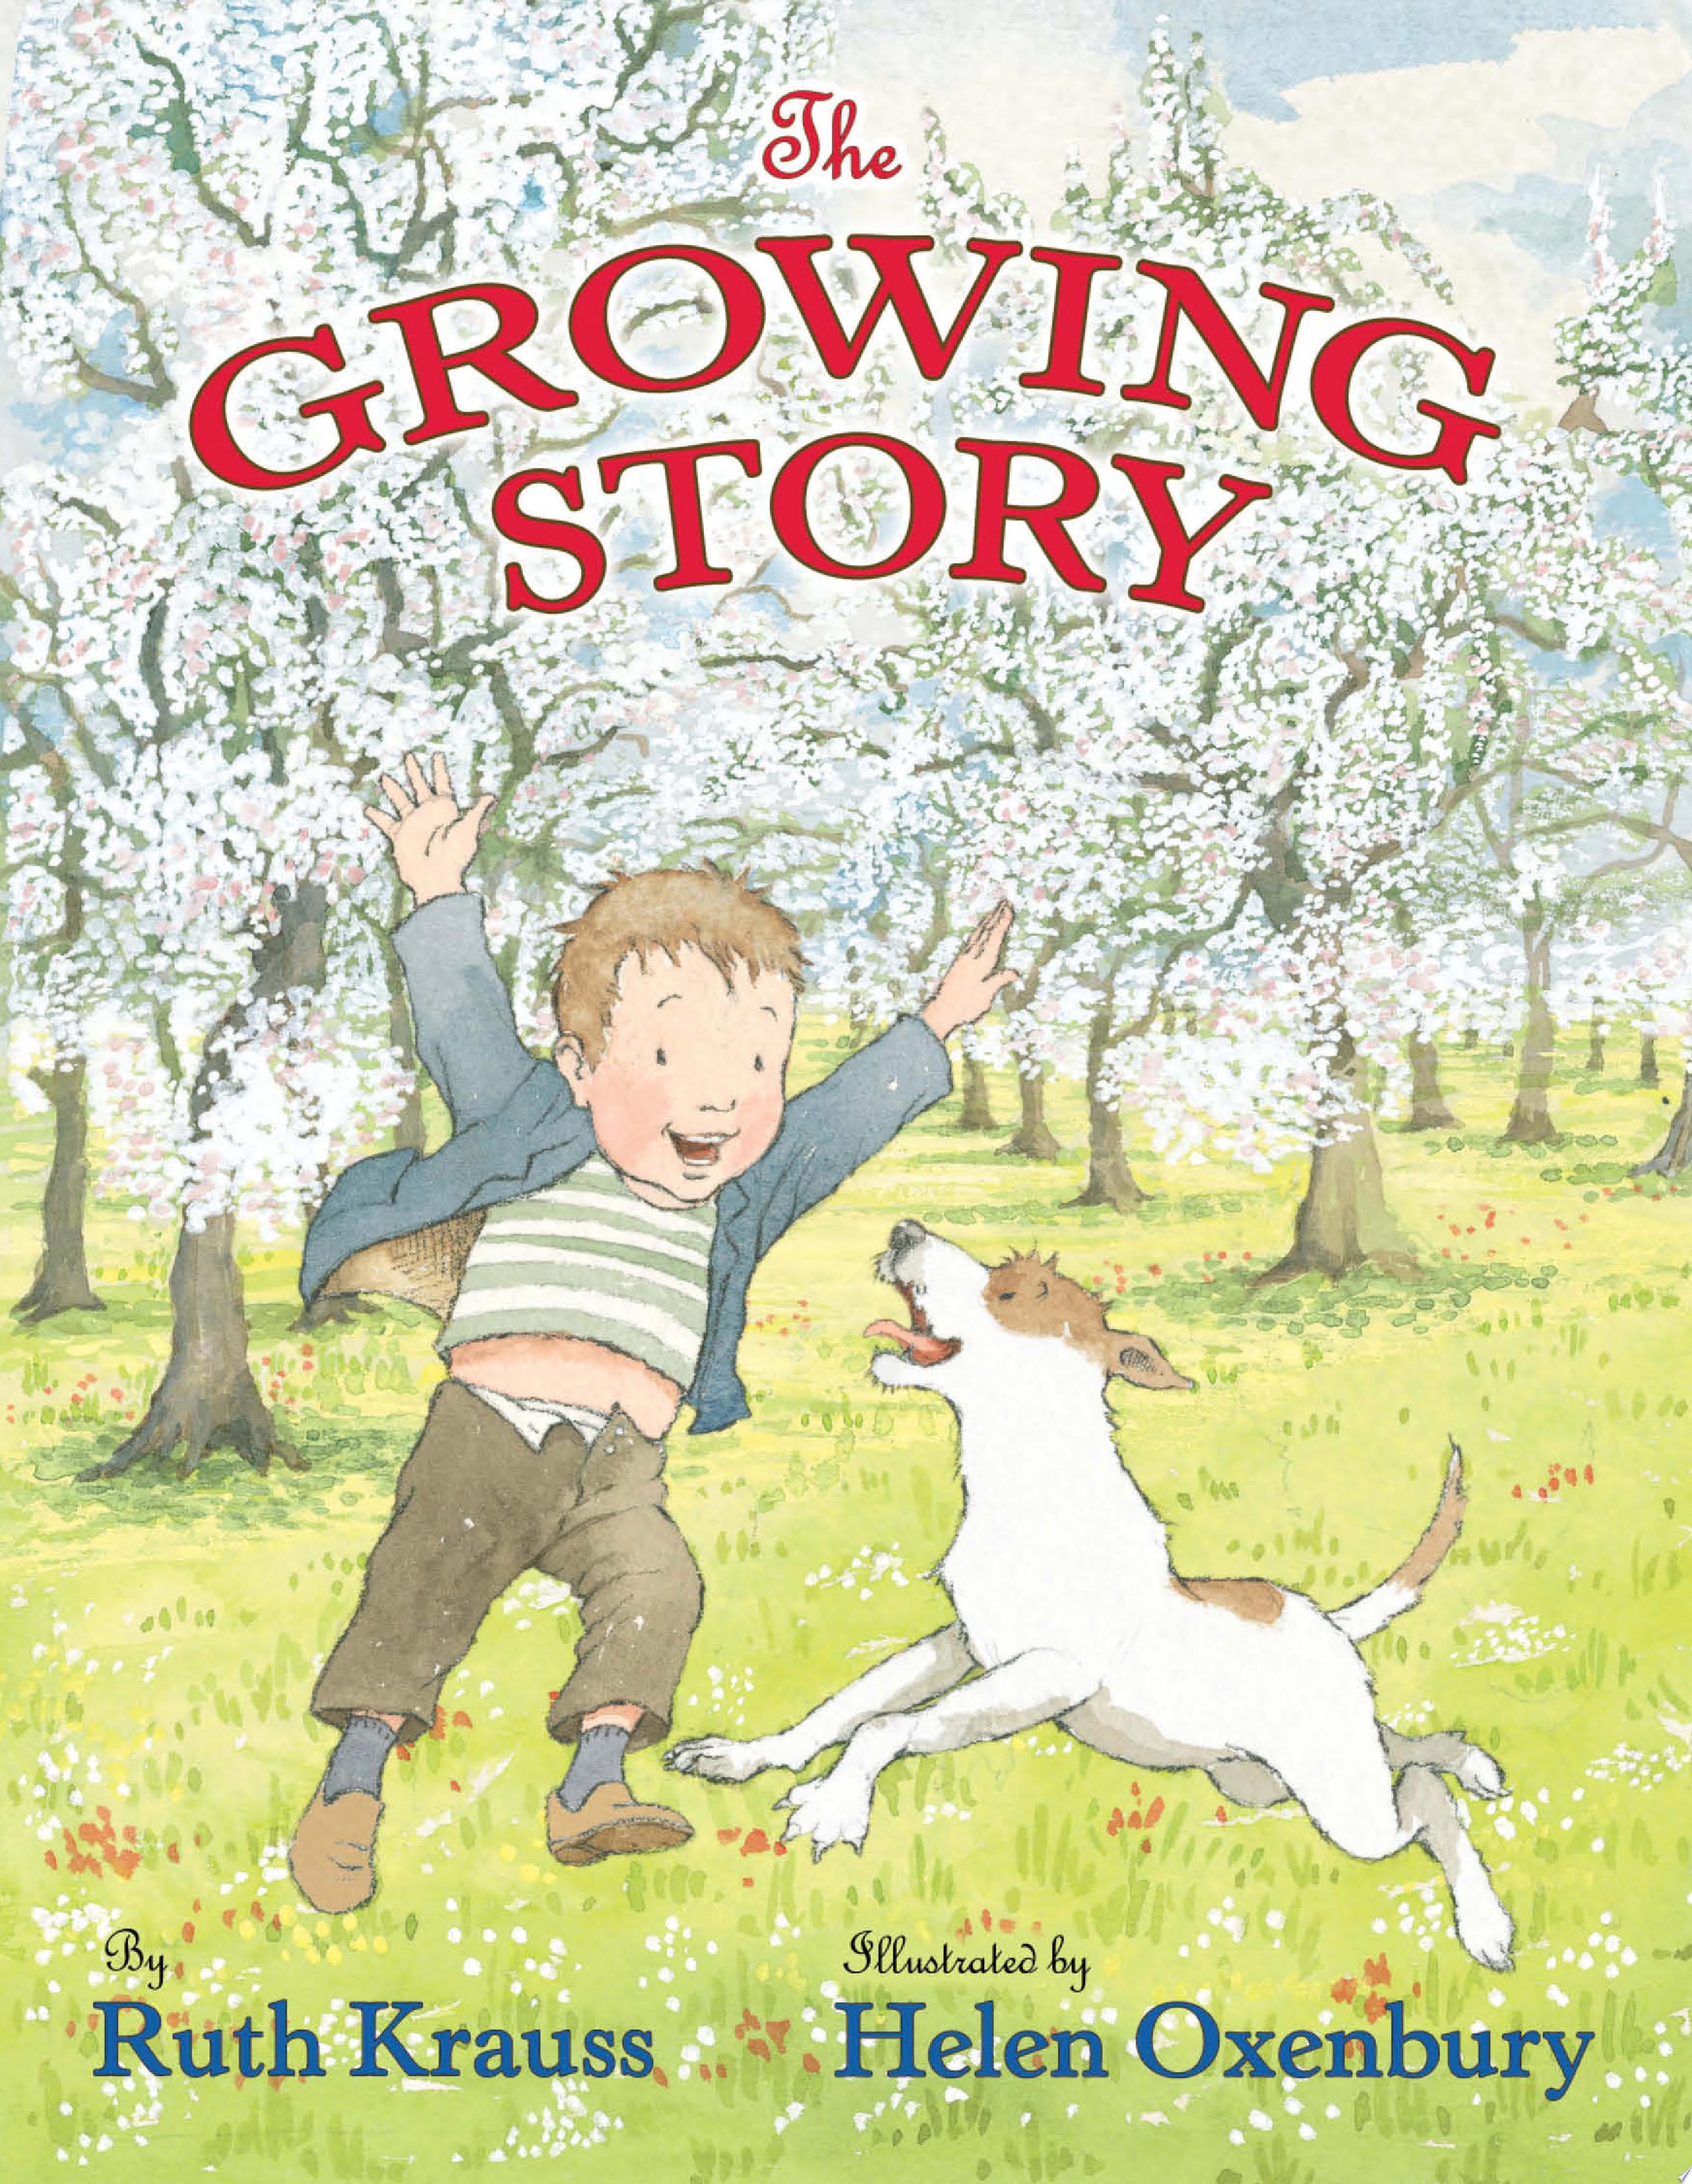 Image for "The Growing Story"